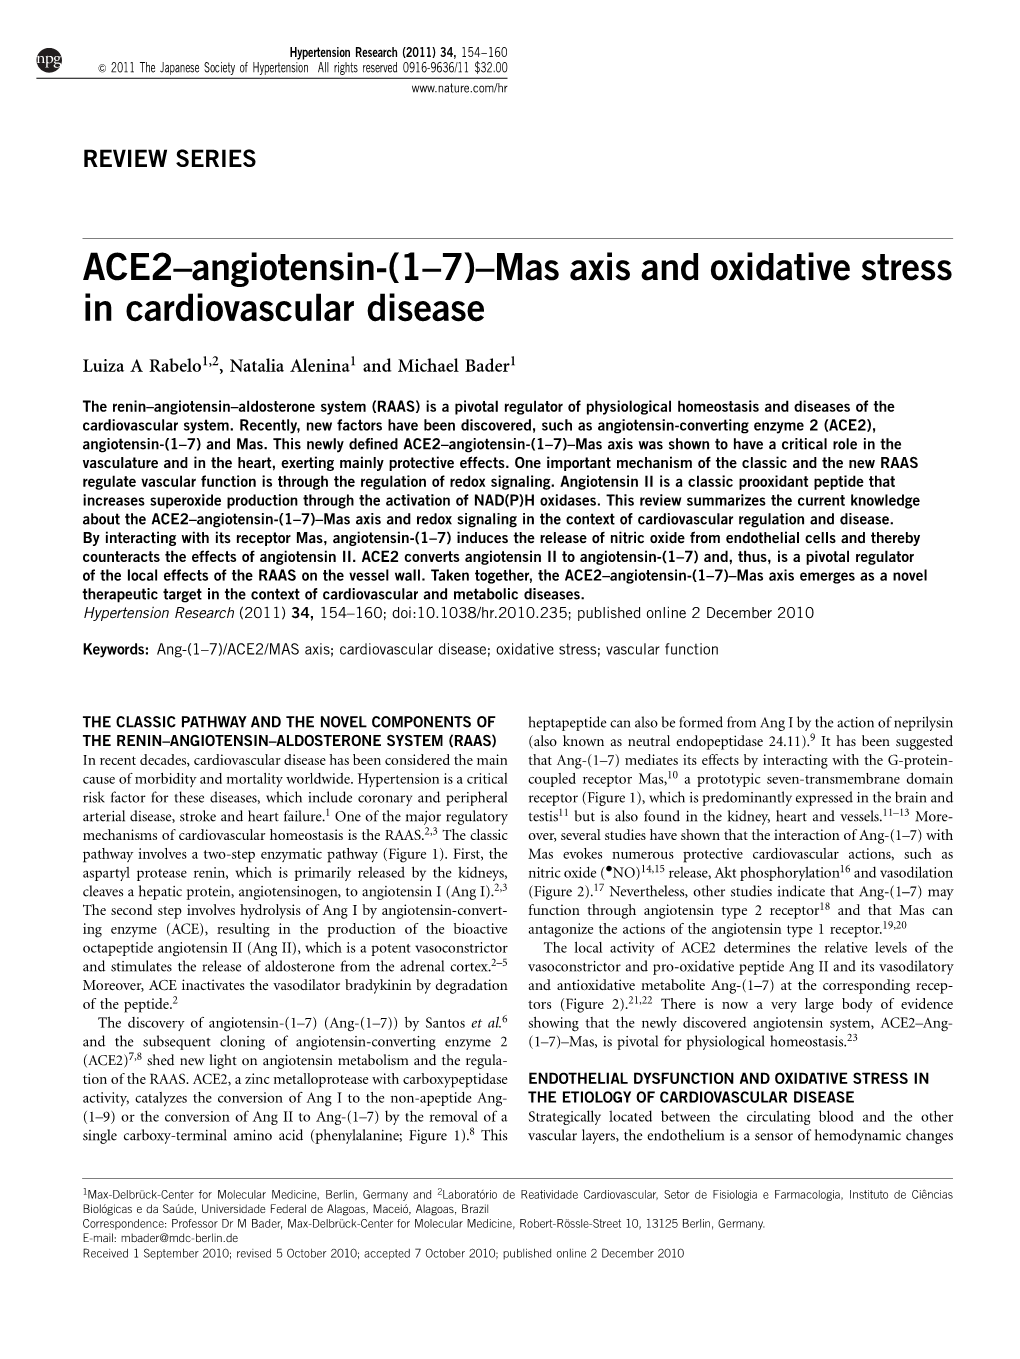 ACE2–Angiotensin-(1–7)–Mas Axis and Oxidative Stress in Cardiovascular Disease